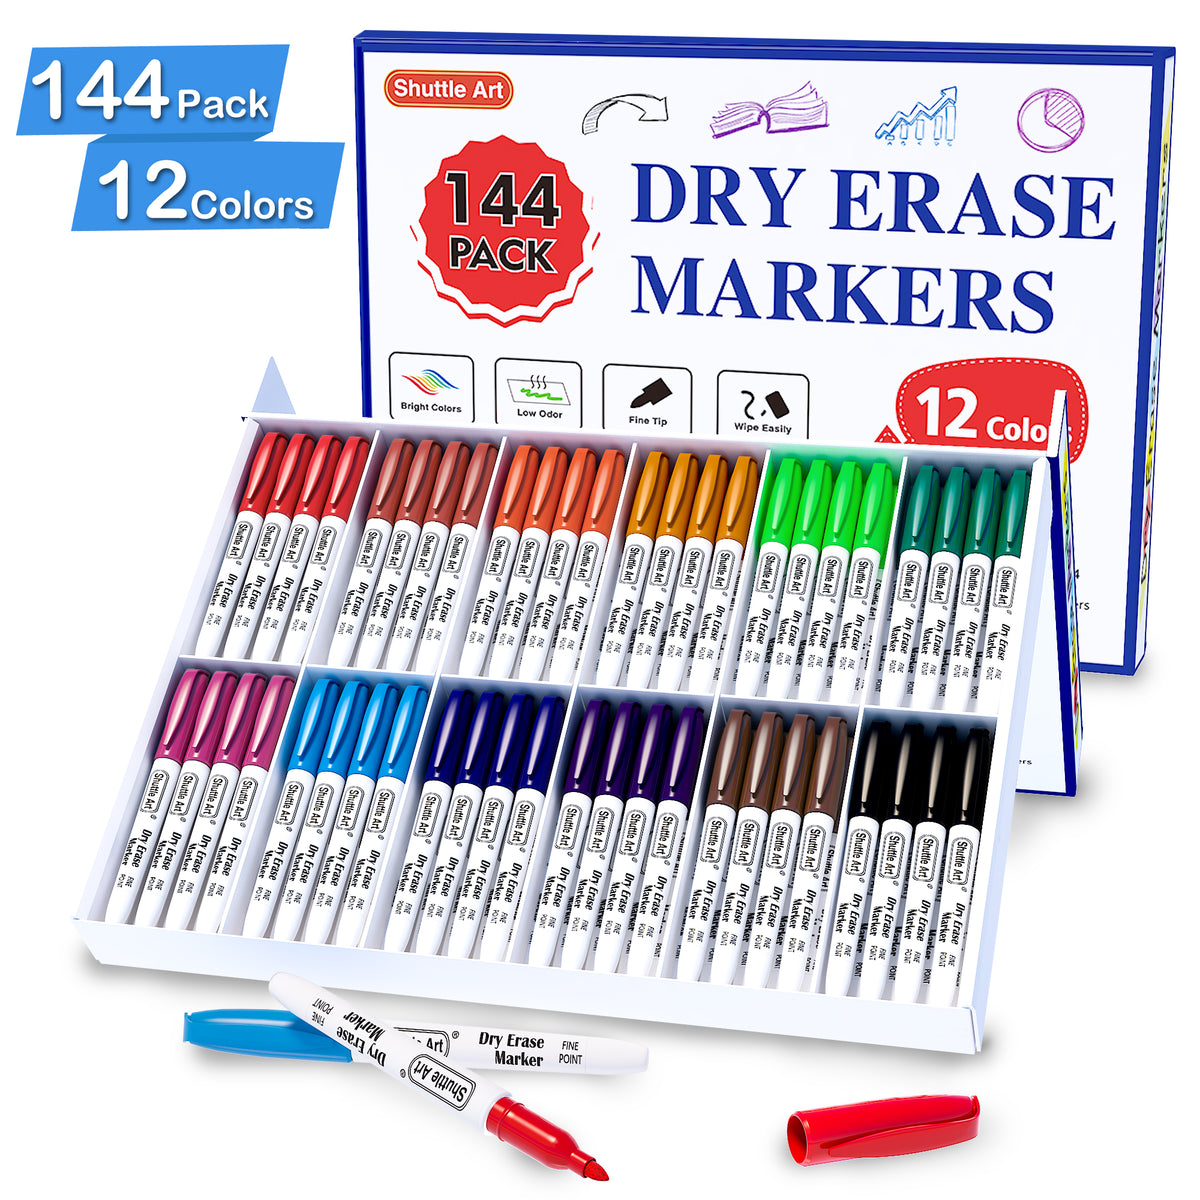 Shuttle Art Dry Erase Markers, 16 Colors Whiteboard Markers,Fine